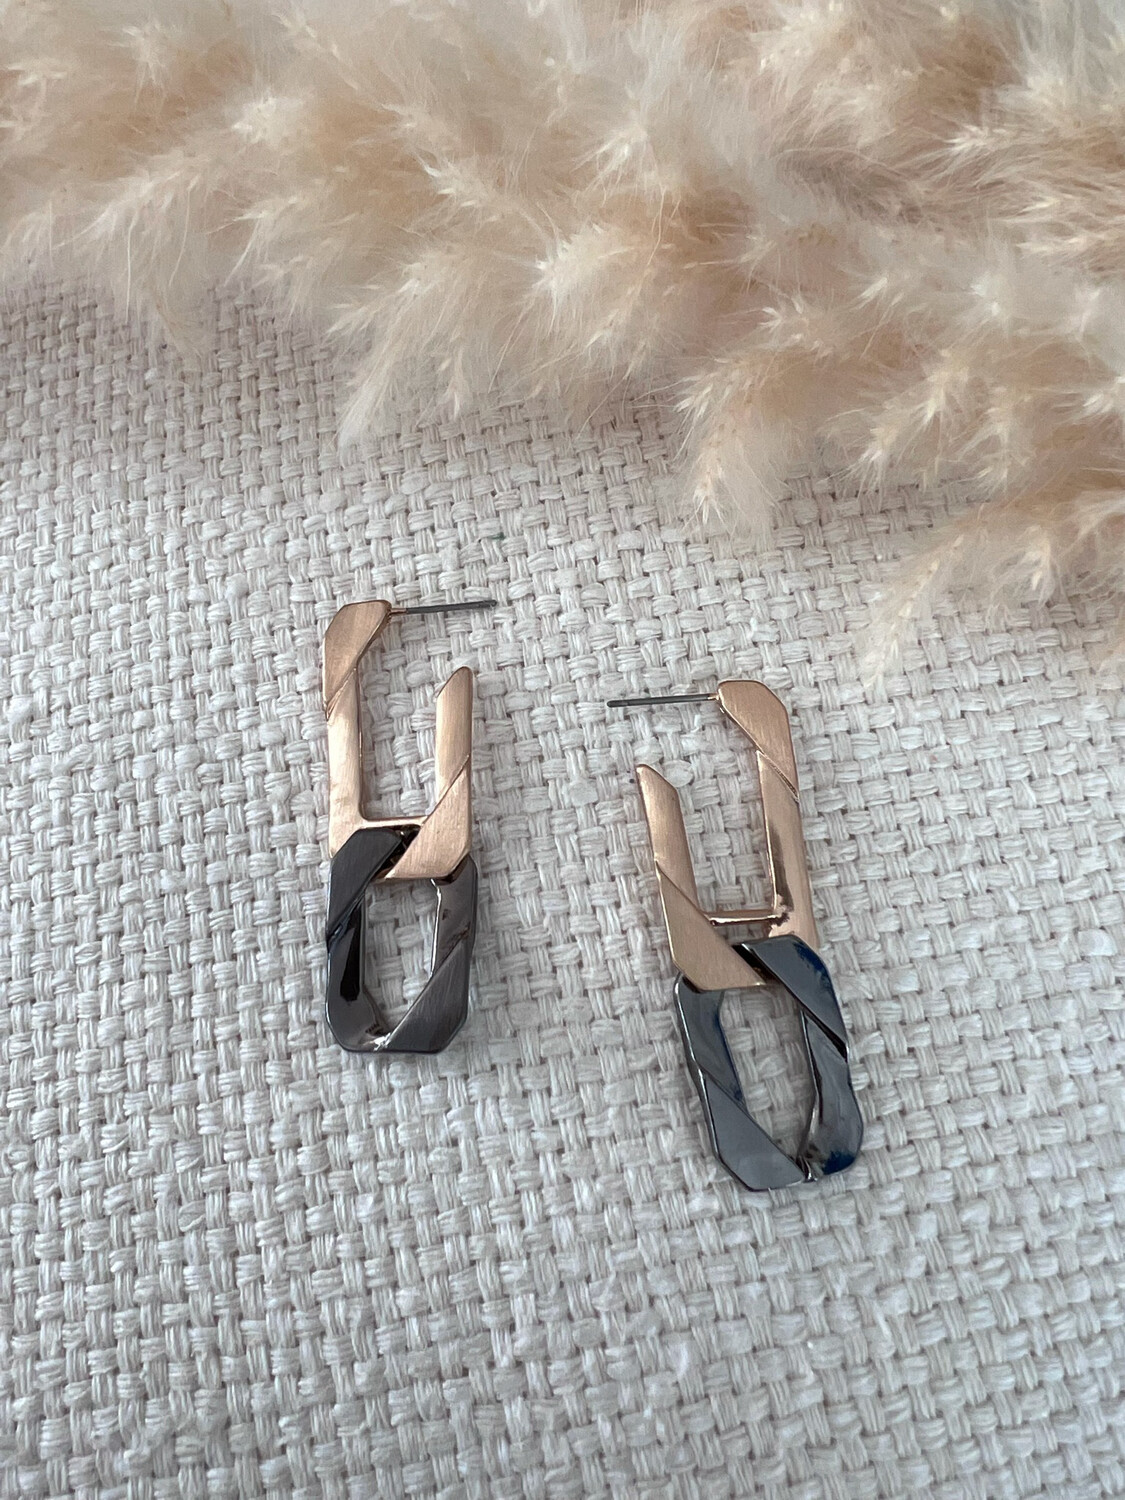 New Two Tones Square Chain Earrings